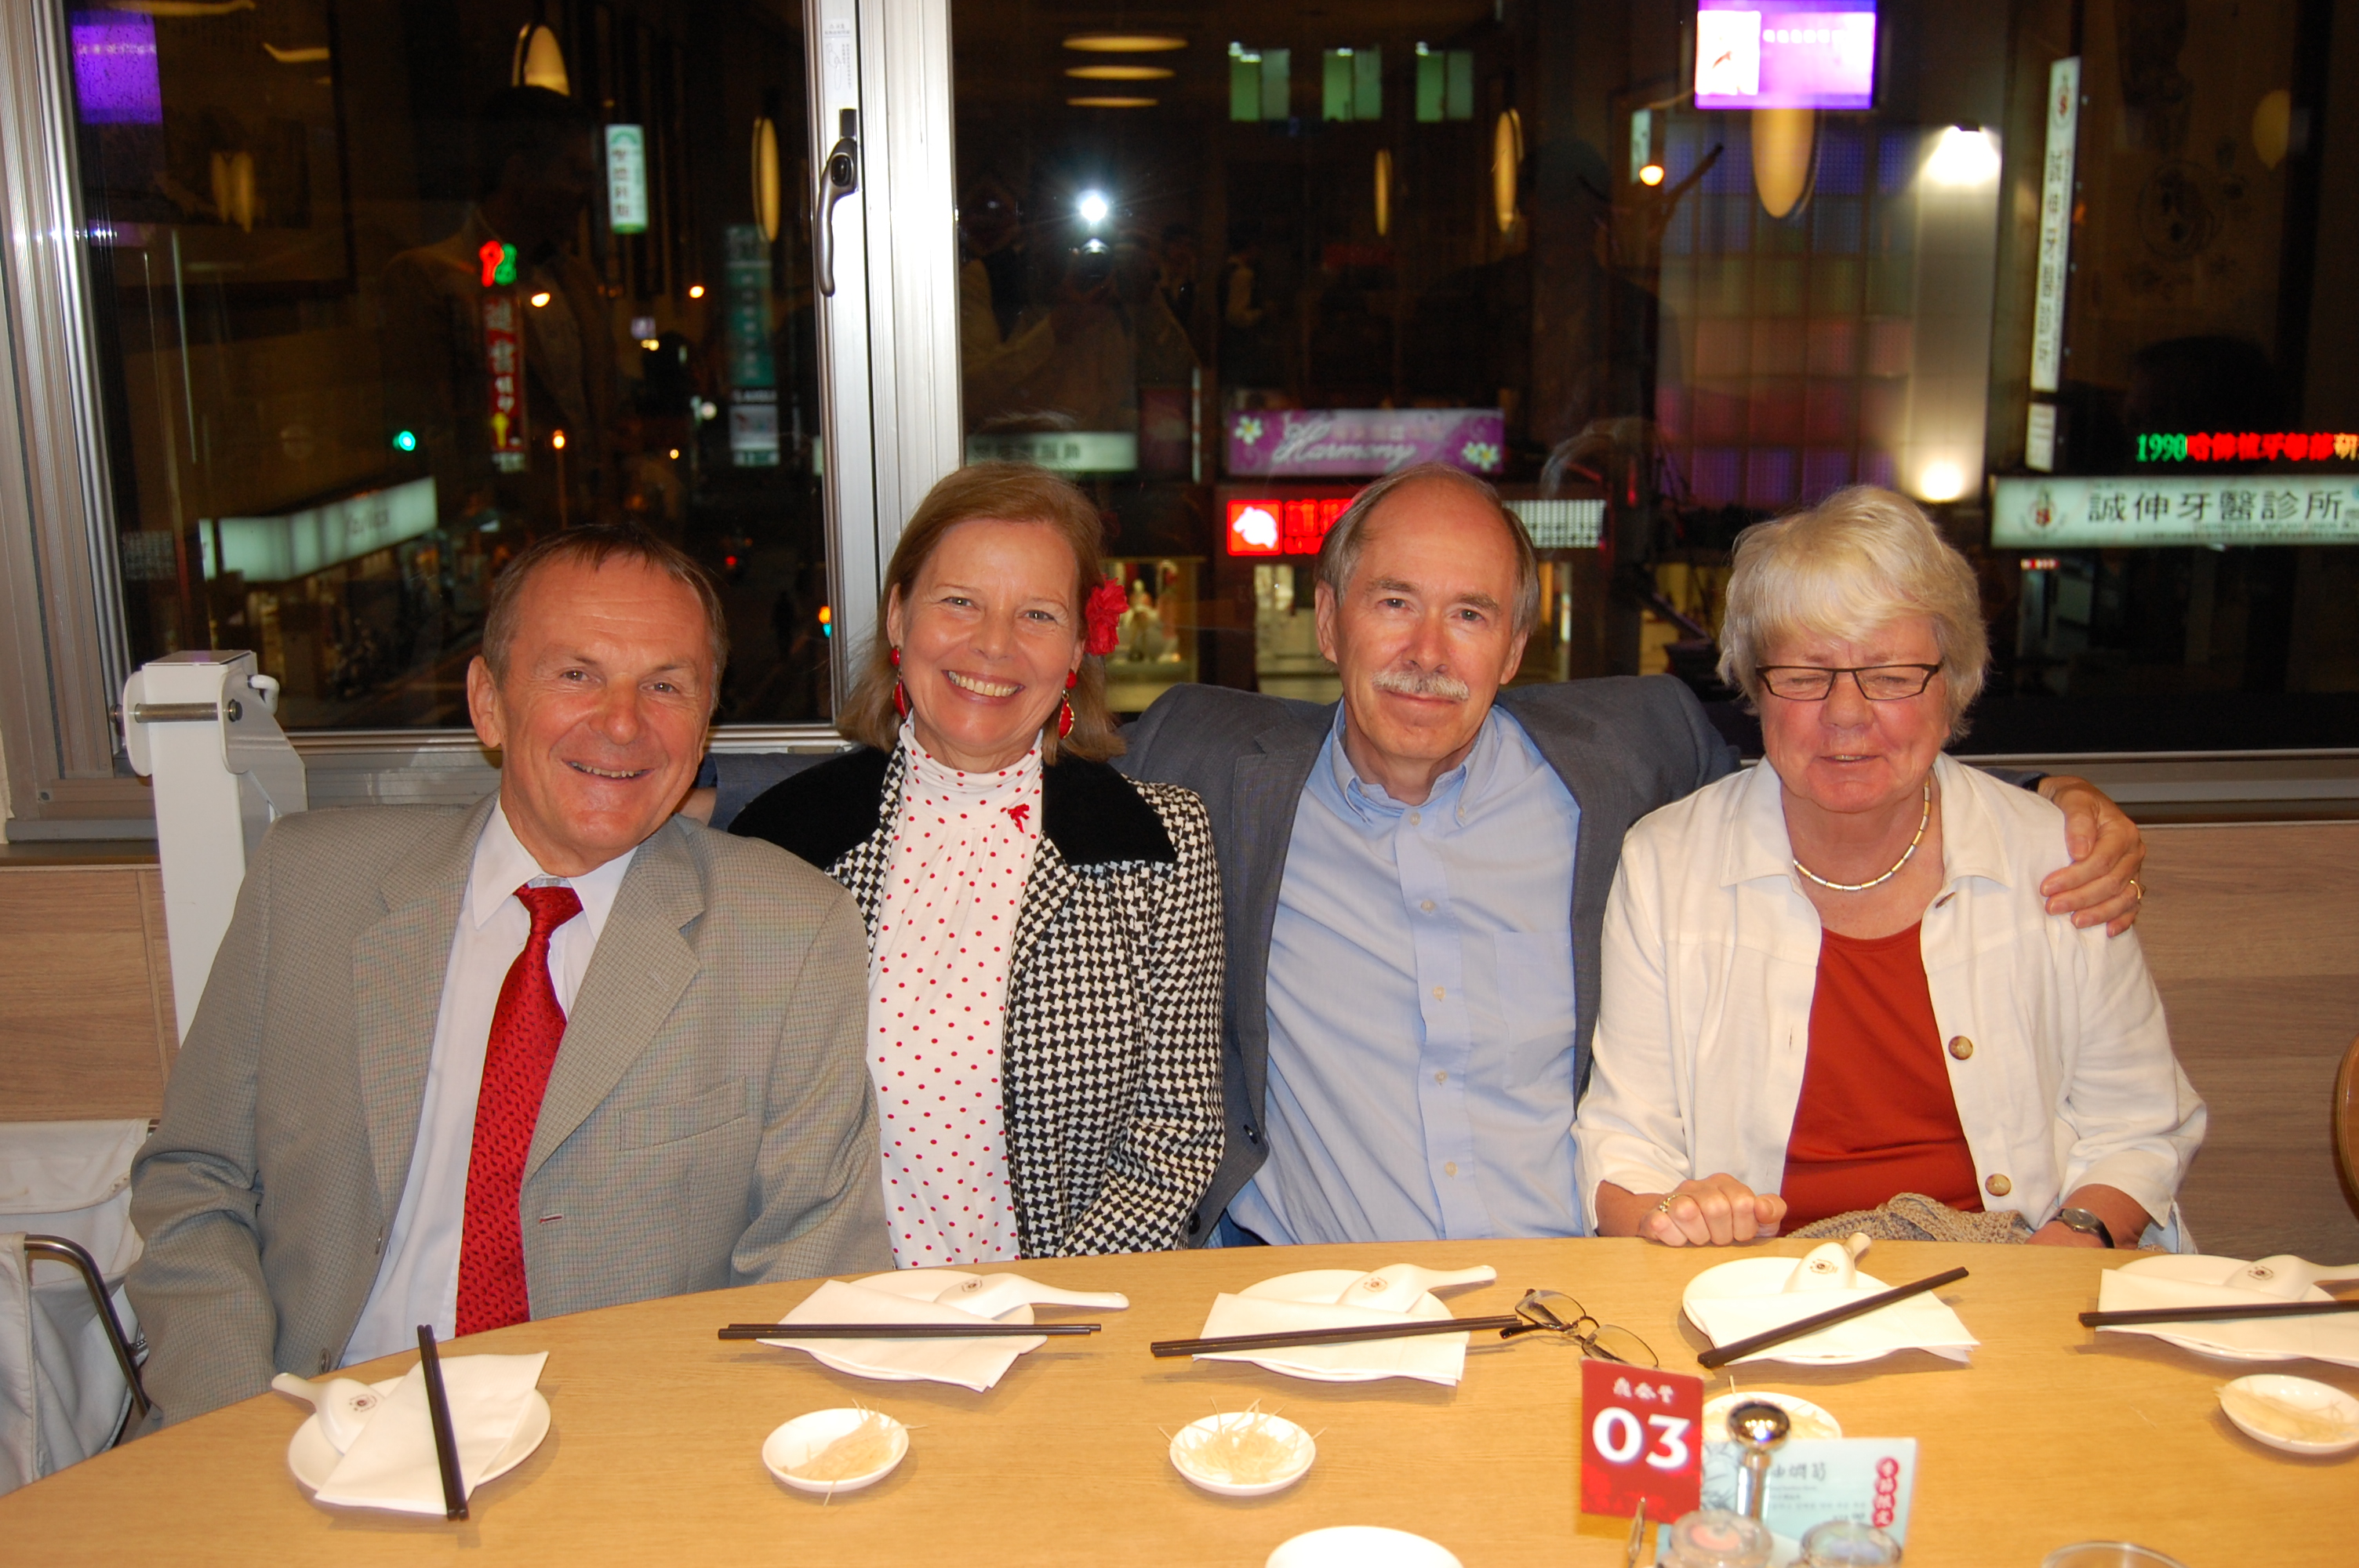 with Gerard 't Hooft, Annemarie Kleinert, and Betteke 't Hooft in Taipeh at the
                                        conference 'Horizons'